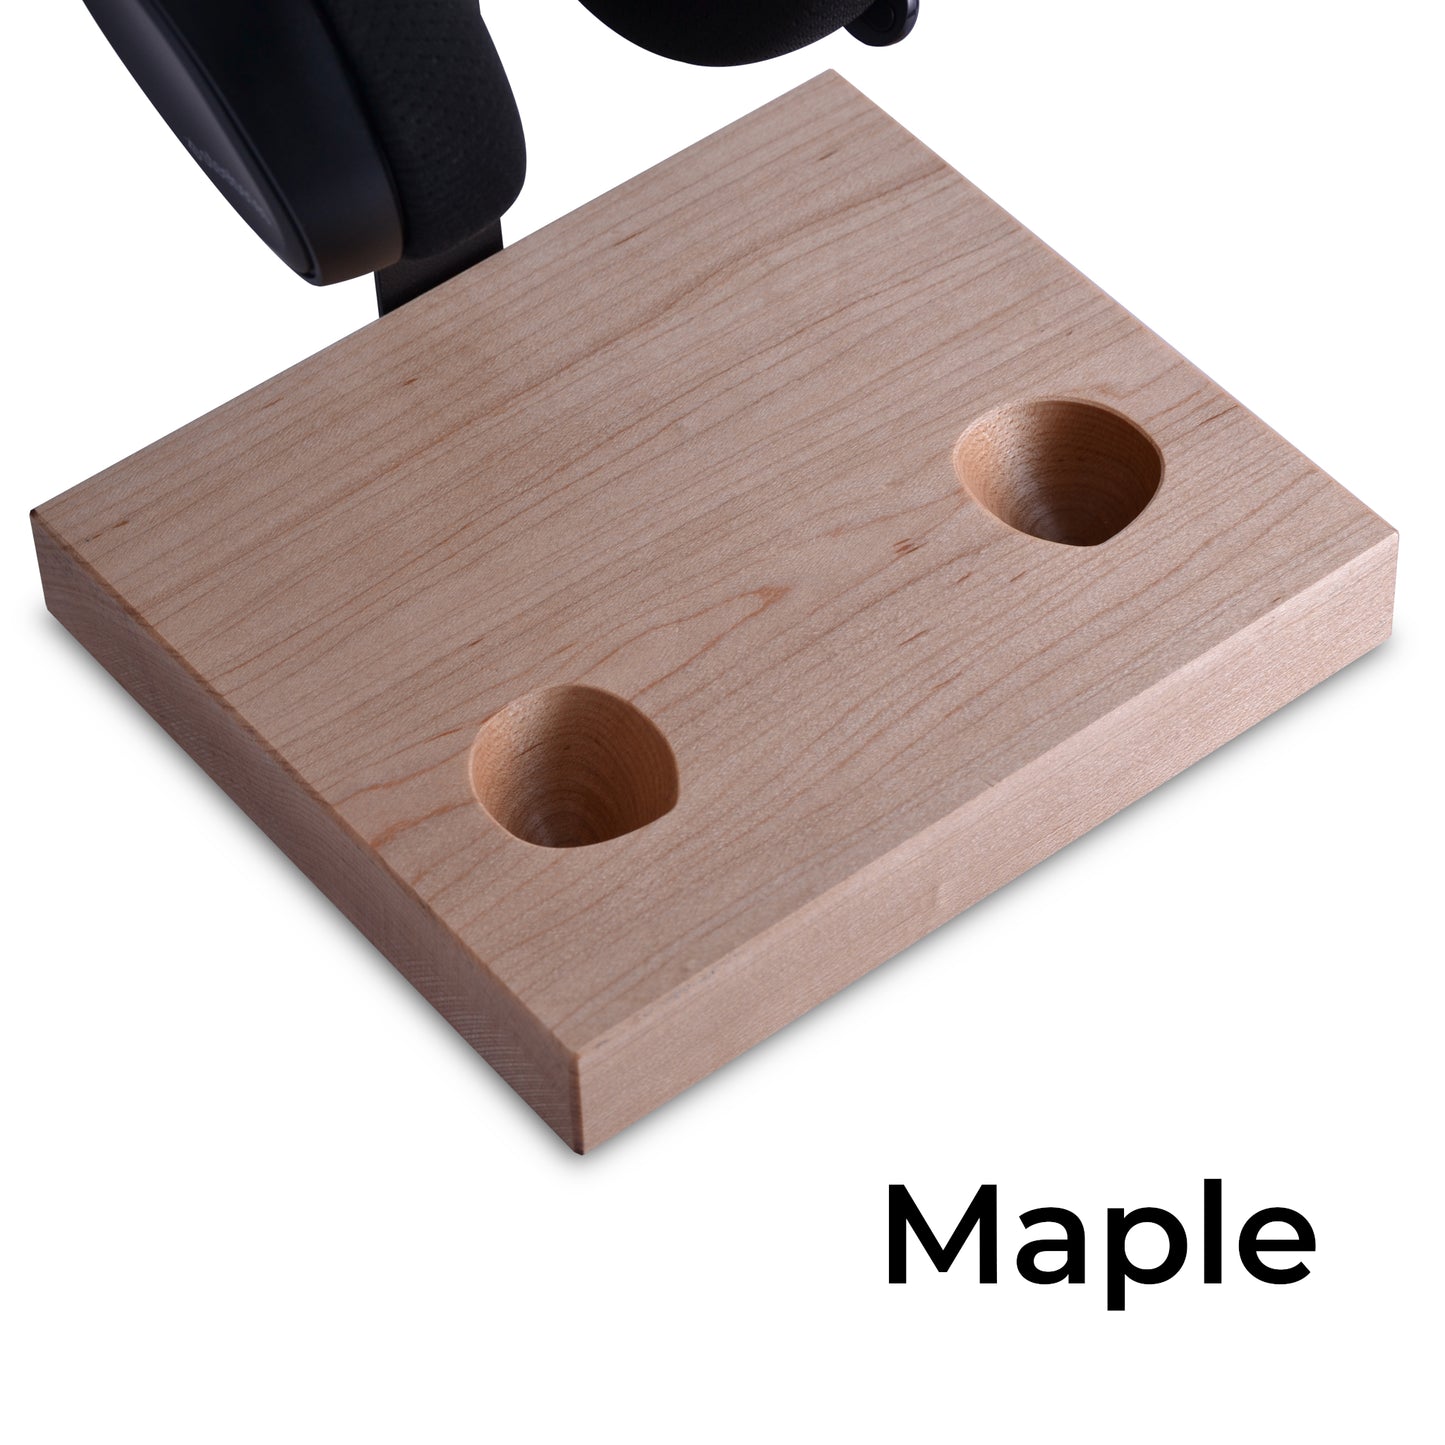 Maple version of headset and controller stand for Nintendo Switch pro controller